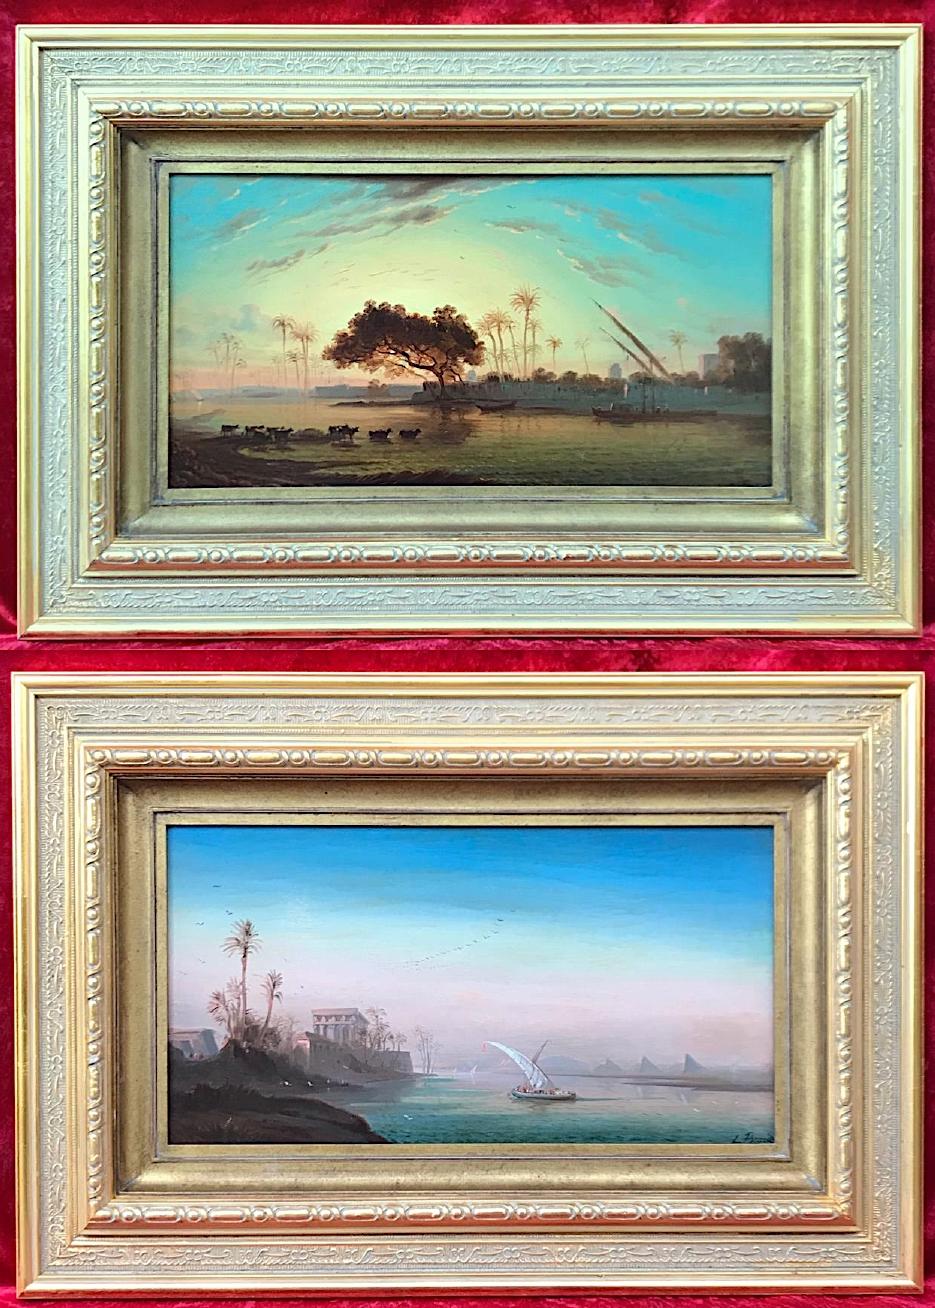 BRARD Léon Landscape Painting - Views of the Nile Valley in pair - Orientalist Paintings